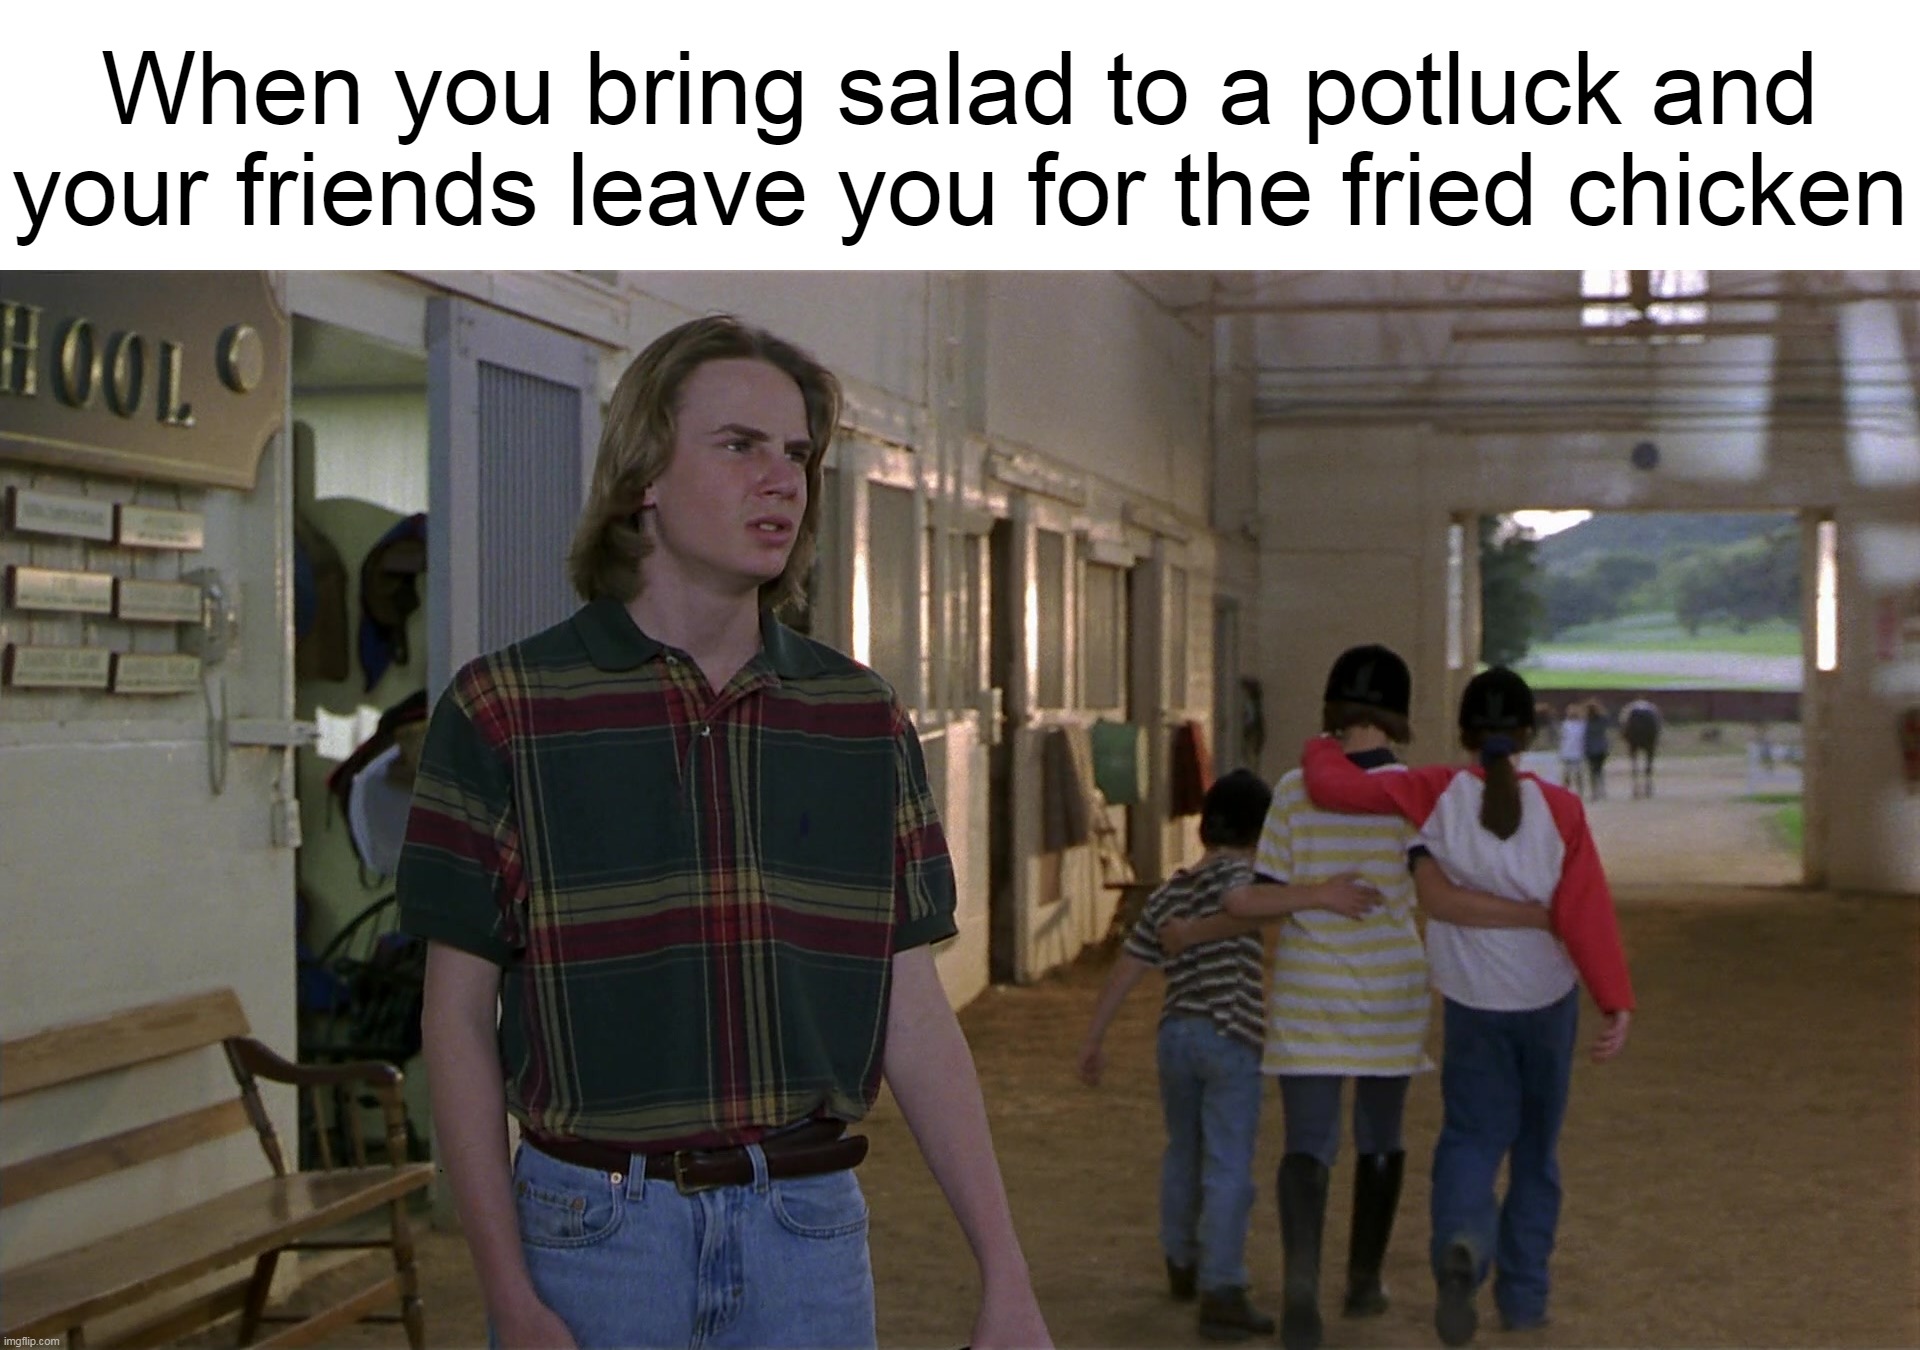 When you bring salad to a potluck and your friends leave you for the fried chicken | image tagged in meme,memes,humor,funny | made w/ Imgflip meme maker